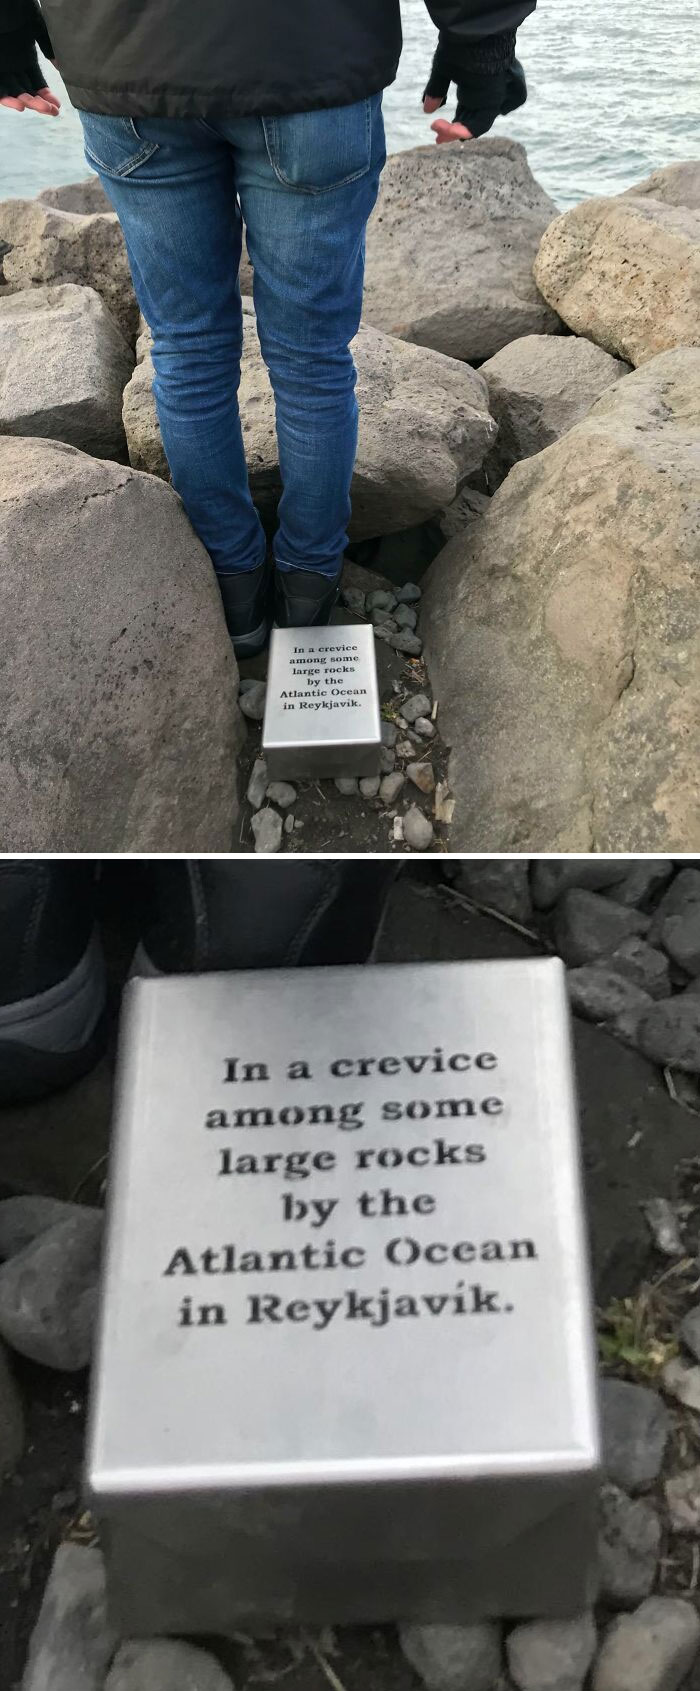 This Geocache Is Indeed In A Crevice Among Some Large Rocks By The Atlantic Ocean In Reykjavík